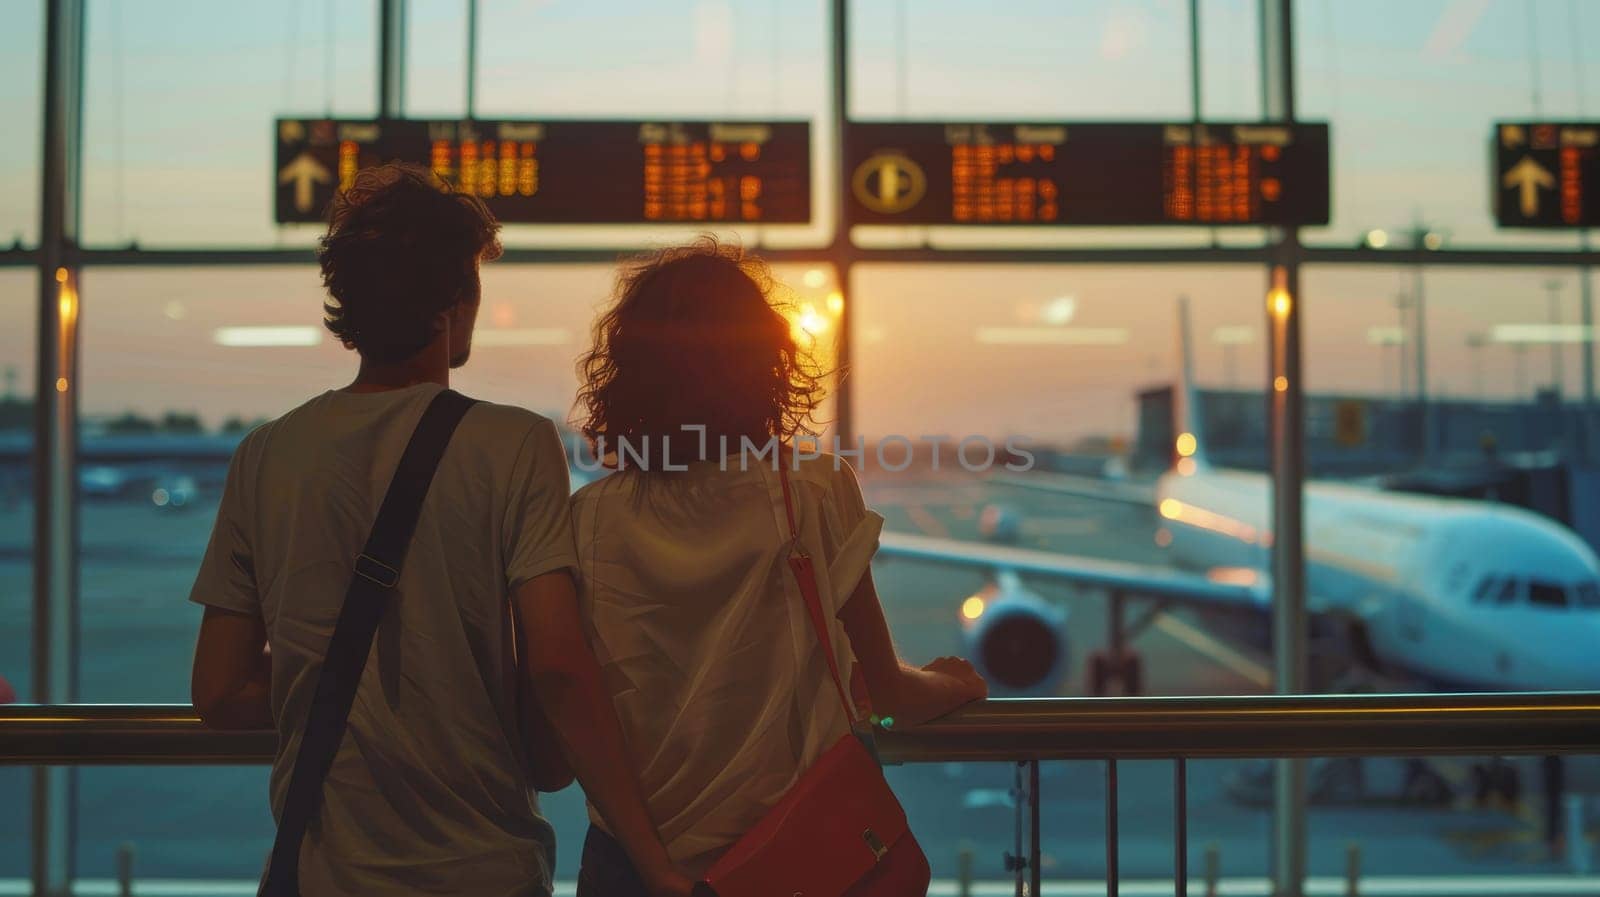 Couple traveling and looking at the flight schedule at the airport, Attractive couple in an airport by nijieimu